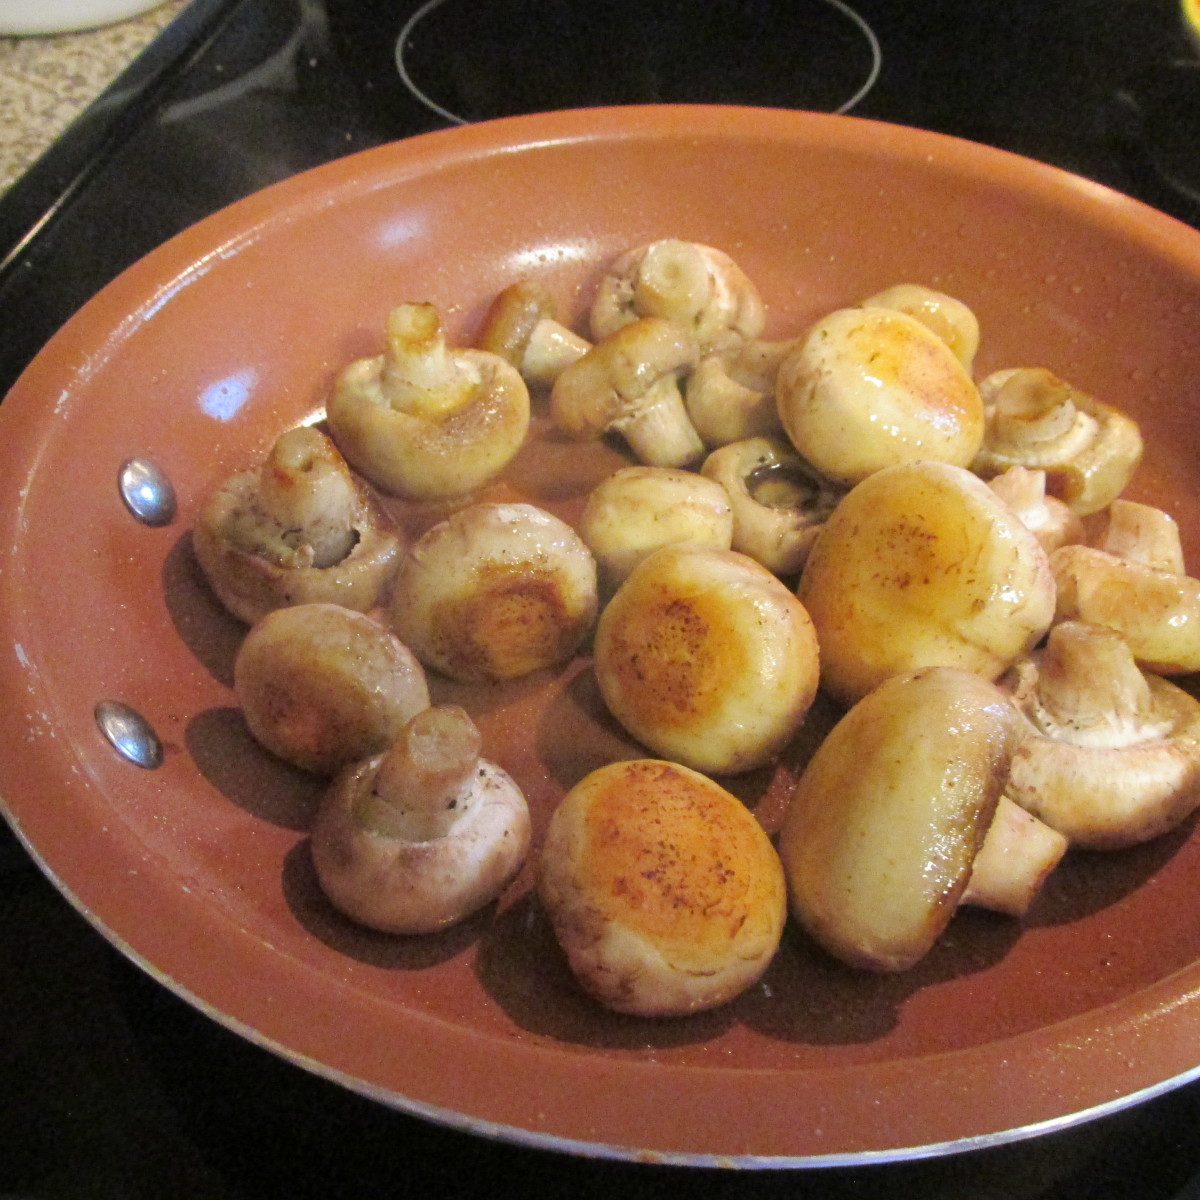 Cooked mushrooms.